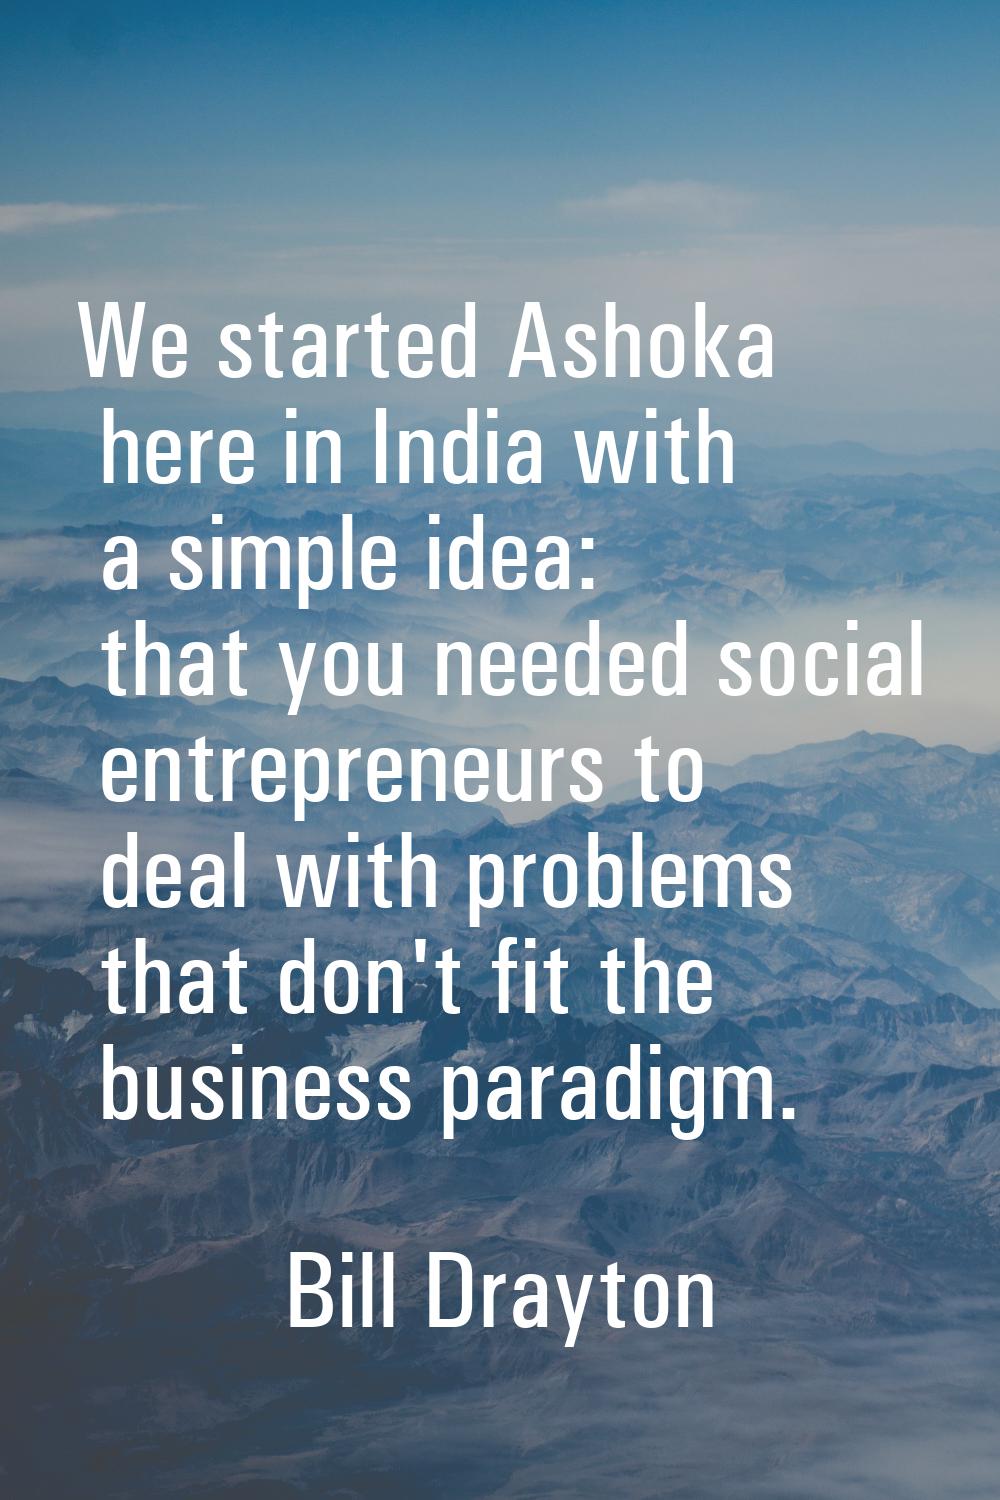 We started Ashoka here in India with a simple idea: that you needed social entrepreneurs to deal wi